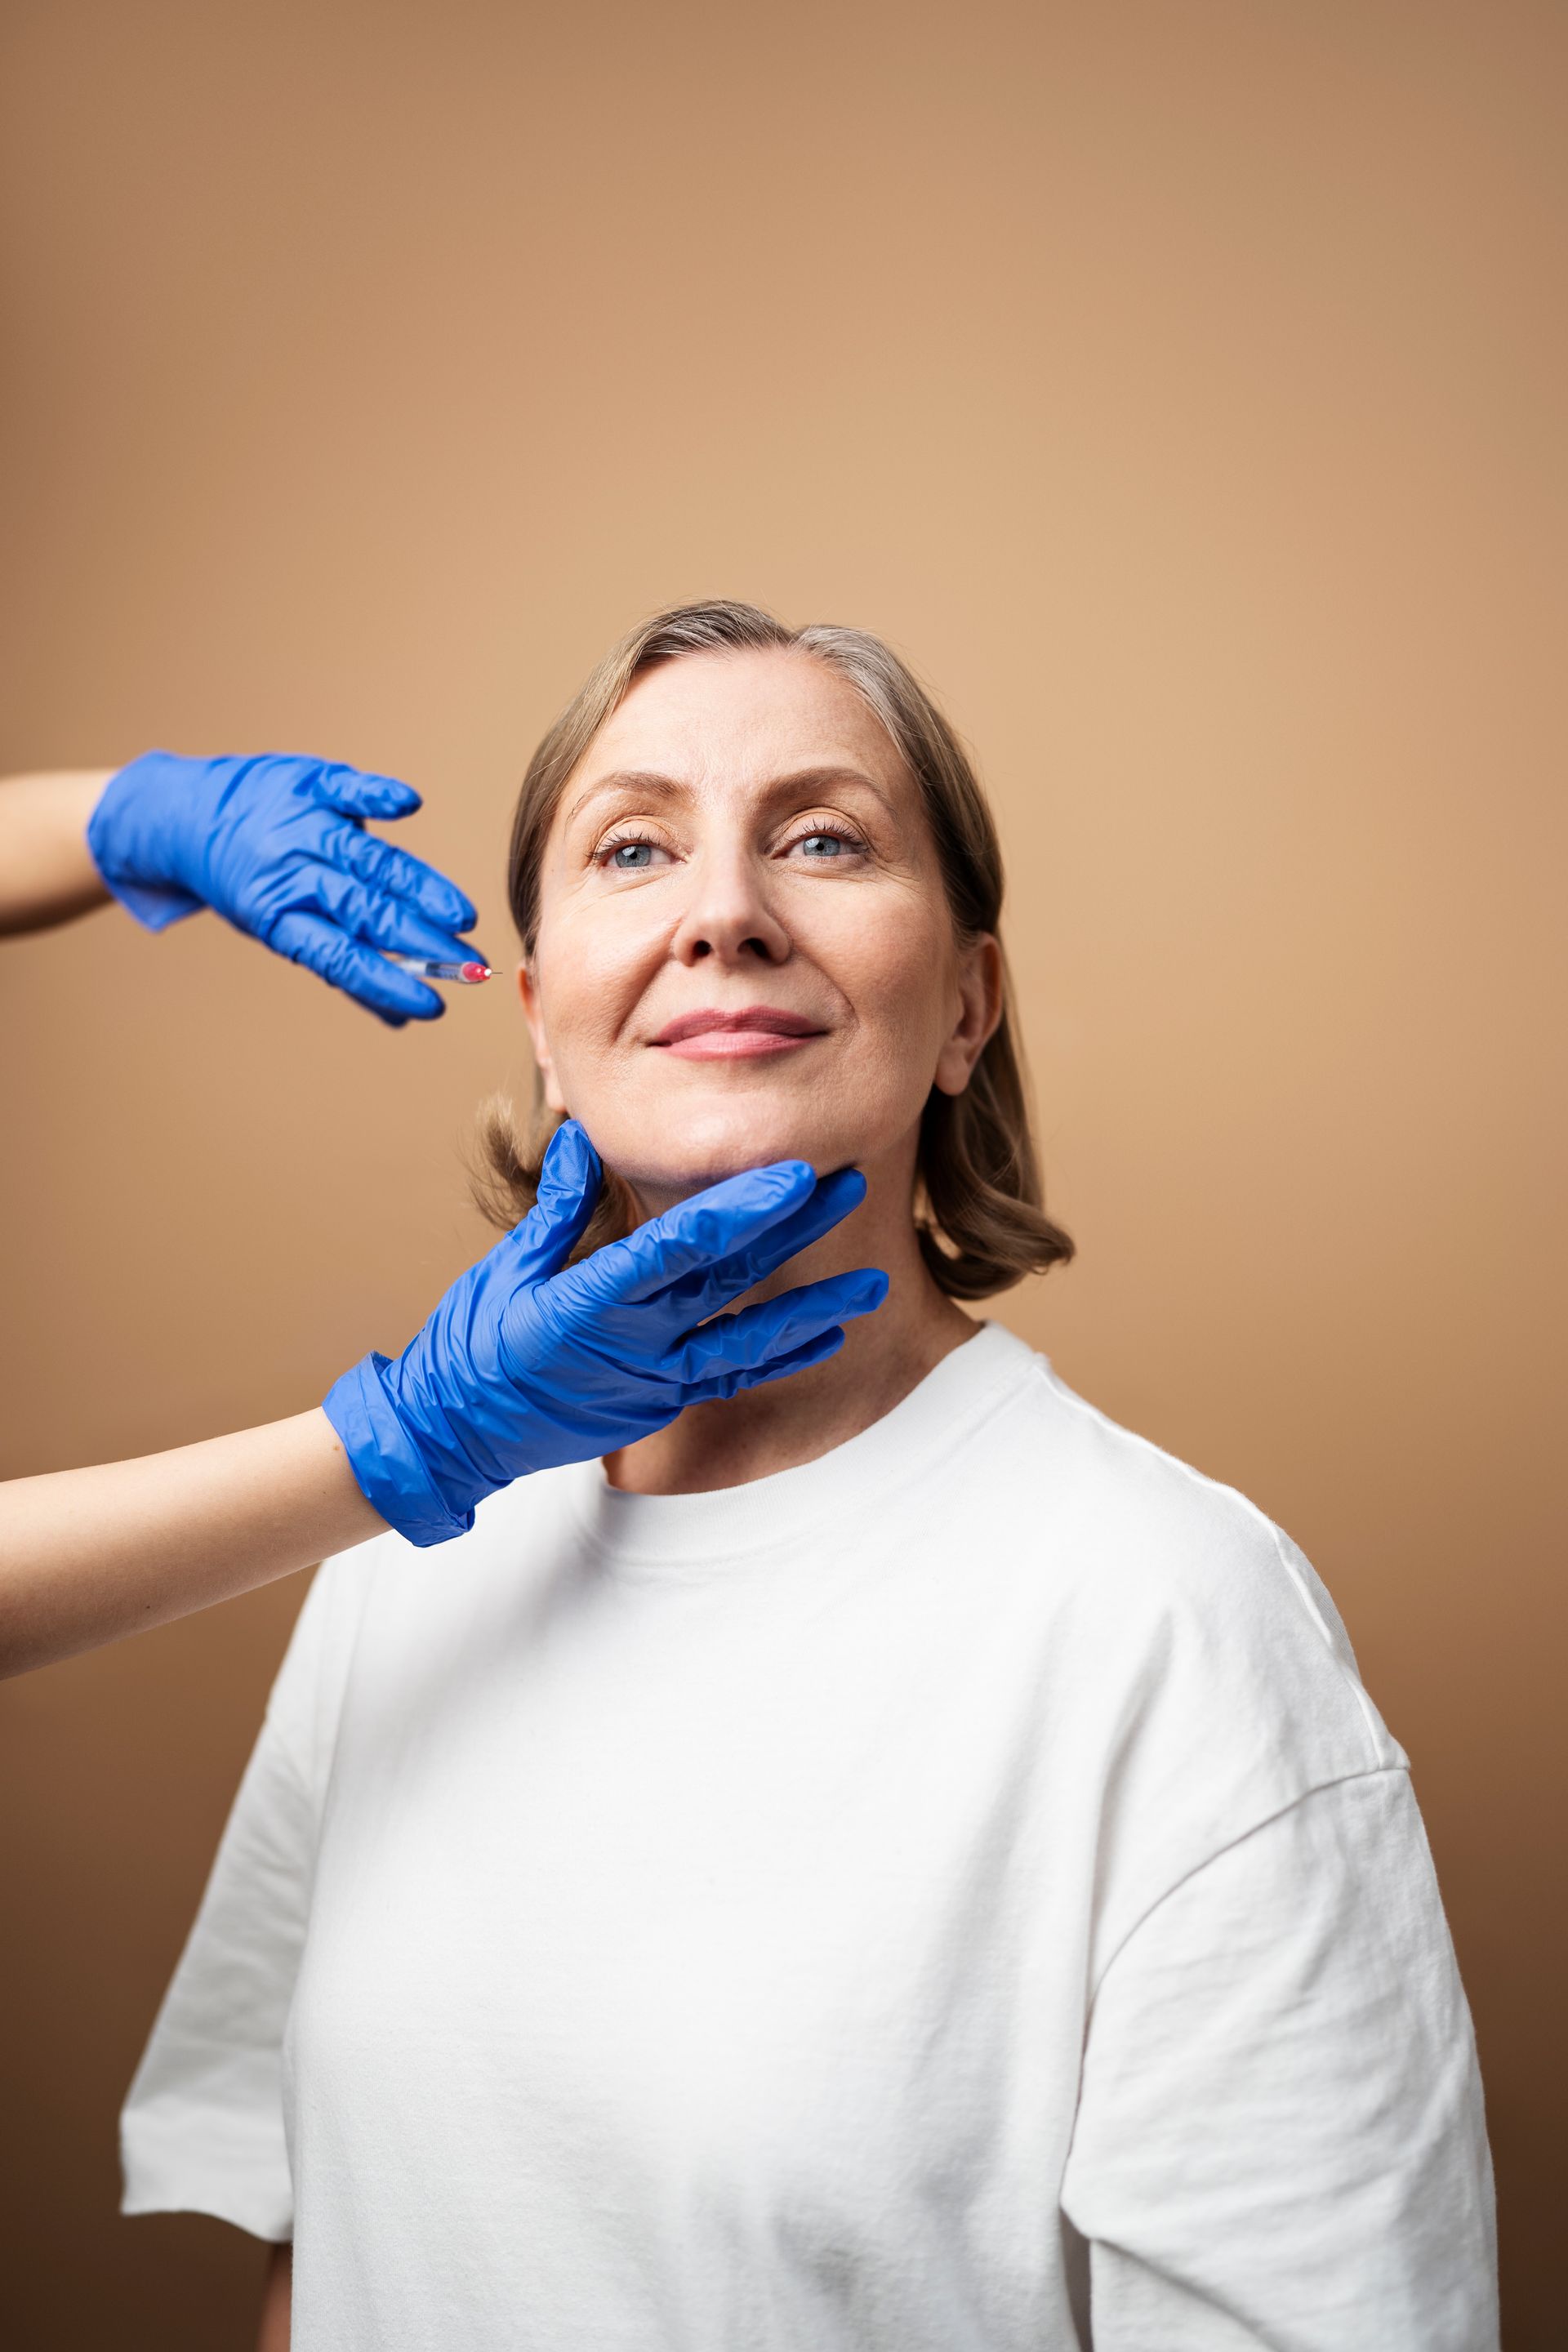 a woman in a white shirt is being examined by a doctor in blue gloves